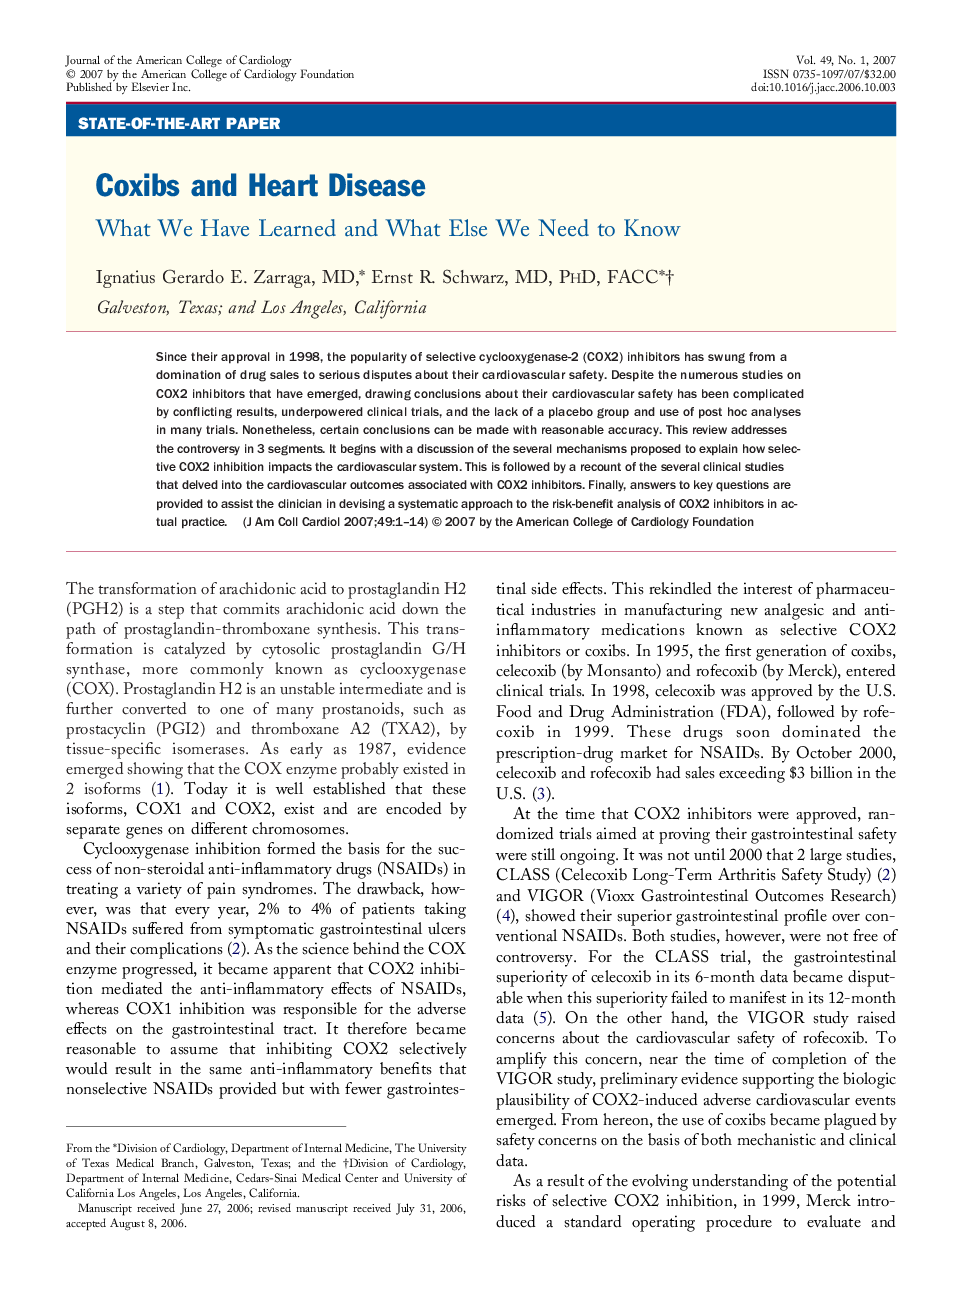 Coxibs and Heart Disease: What We Have Learned and What Else We Need to Know